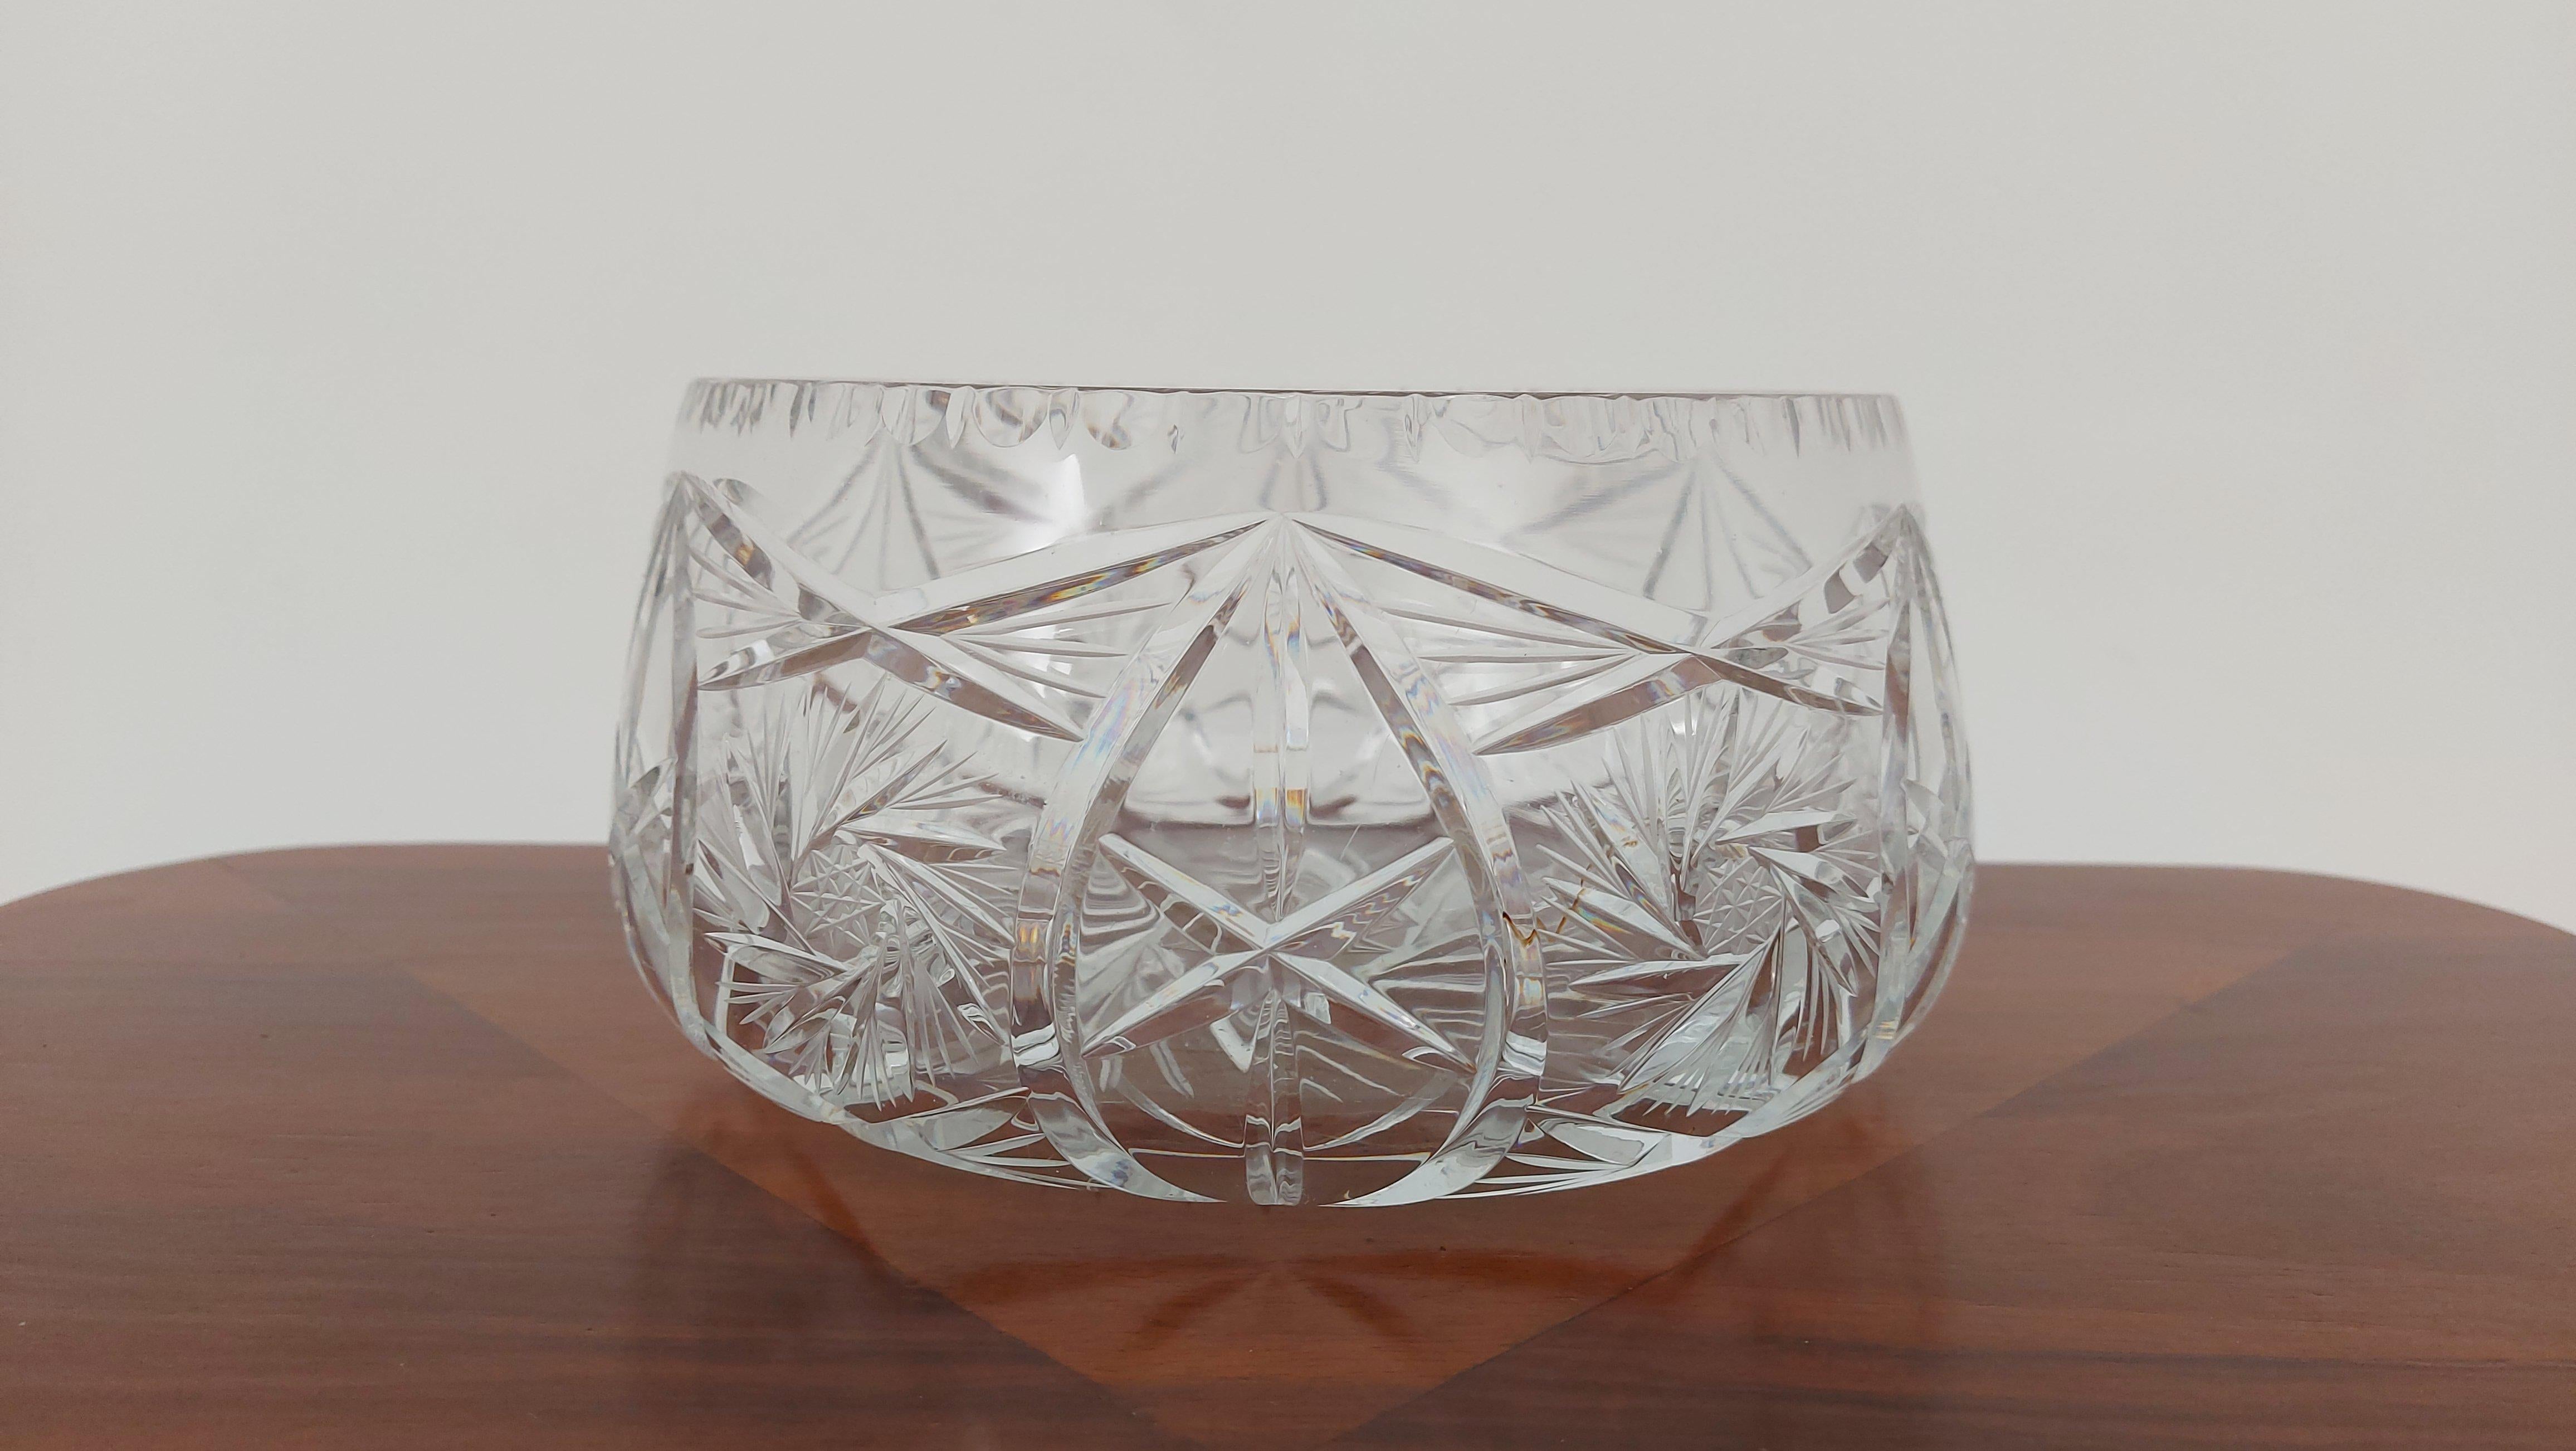 Crystal bowl for fruit or sweets.

Made in Poland in the 1950s / 1960s.

Very good condition.

Dimensions: height 11.5 cm / diameter 24 cm.